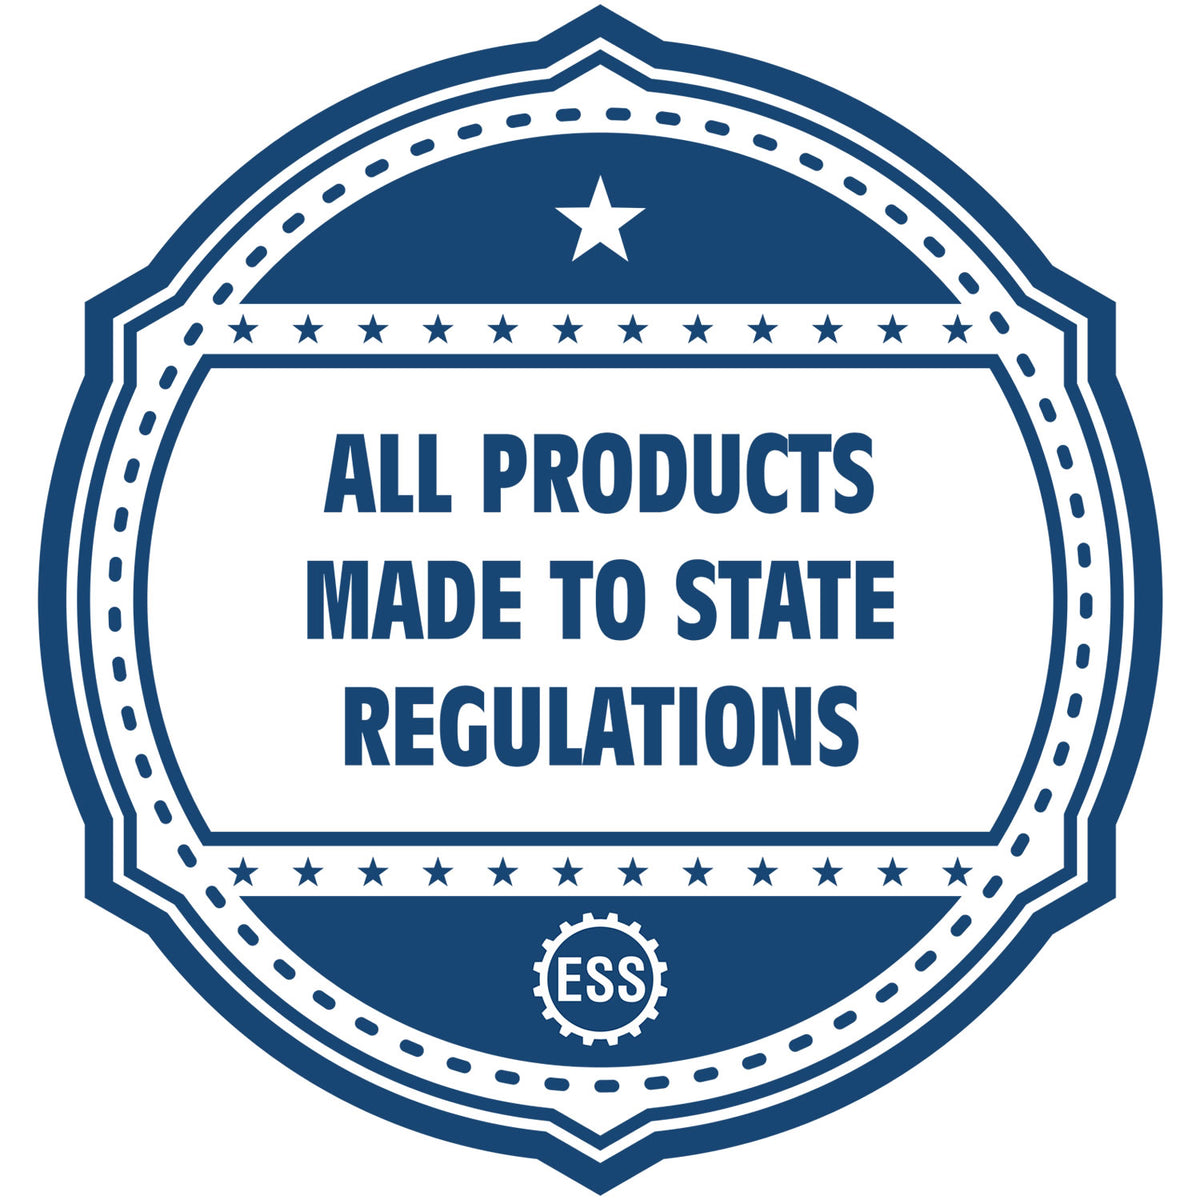 An icon or badge element for the Vermont Landscape Architectural Seal Stamp showing that this product is made in compliance with state regulations.